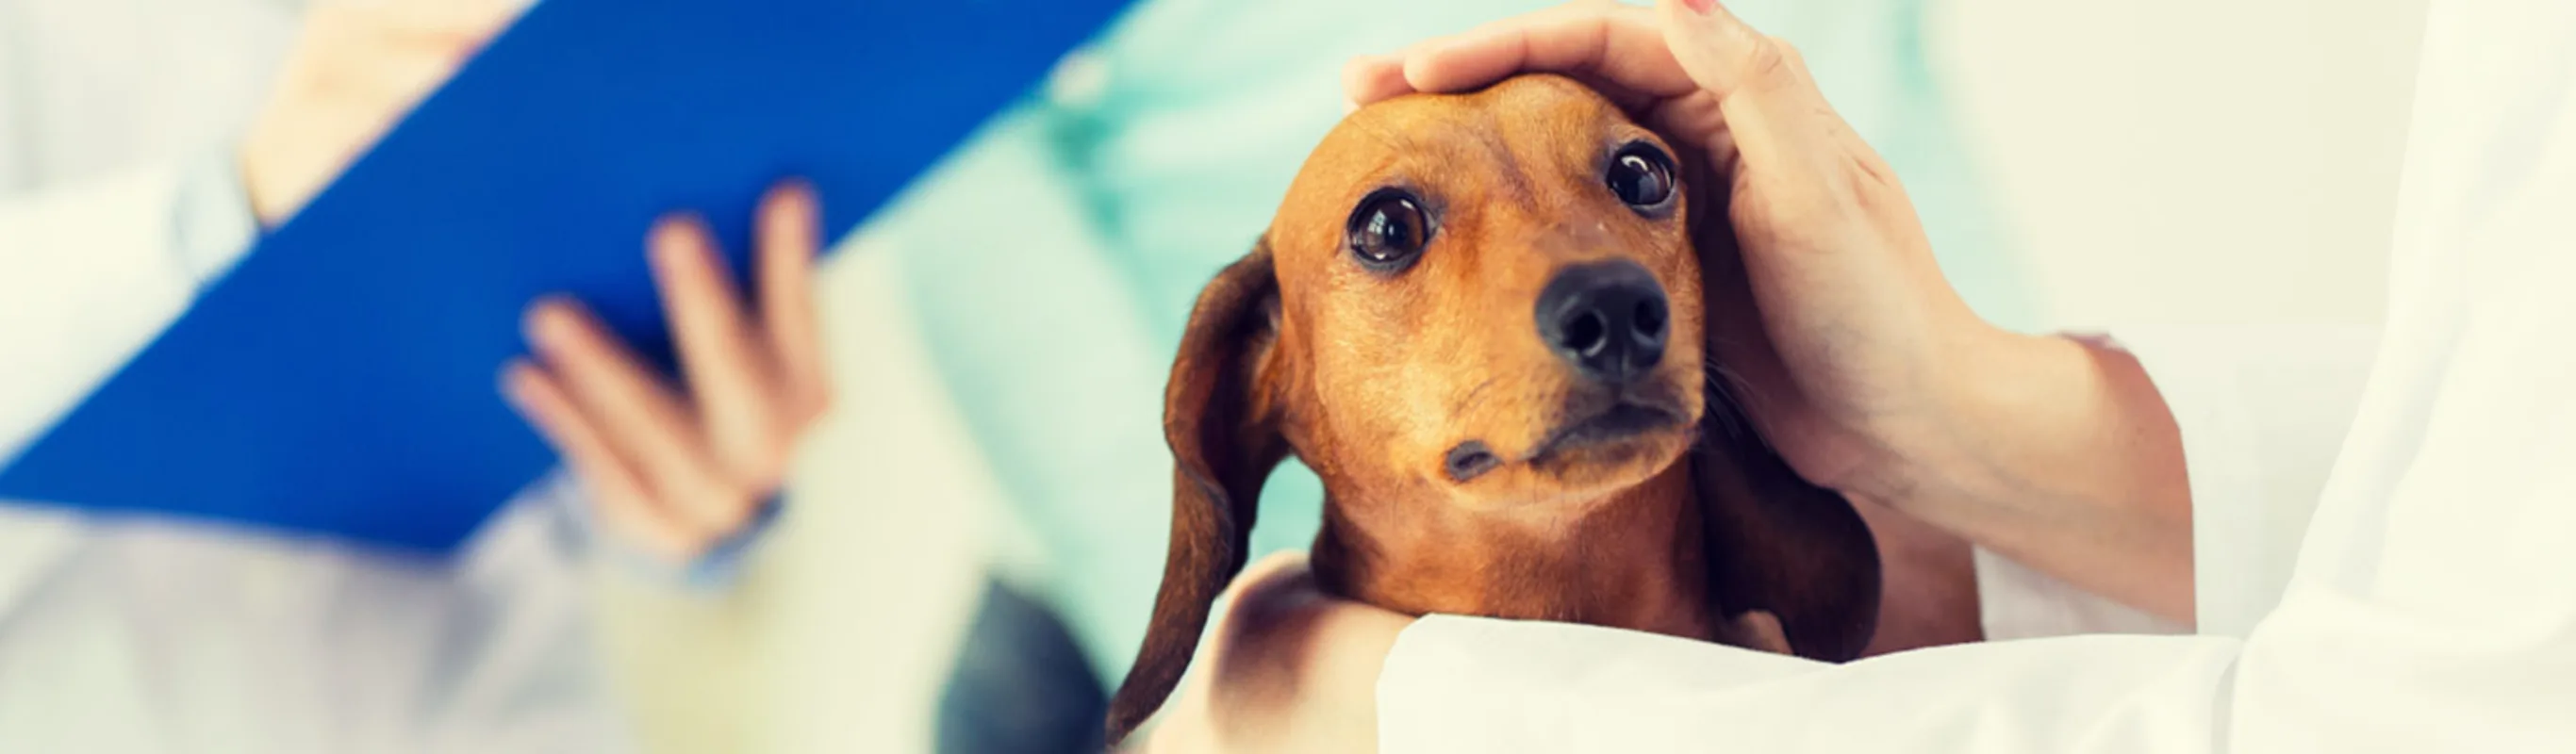 Dachshund being pet by a veterinarian 